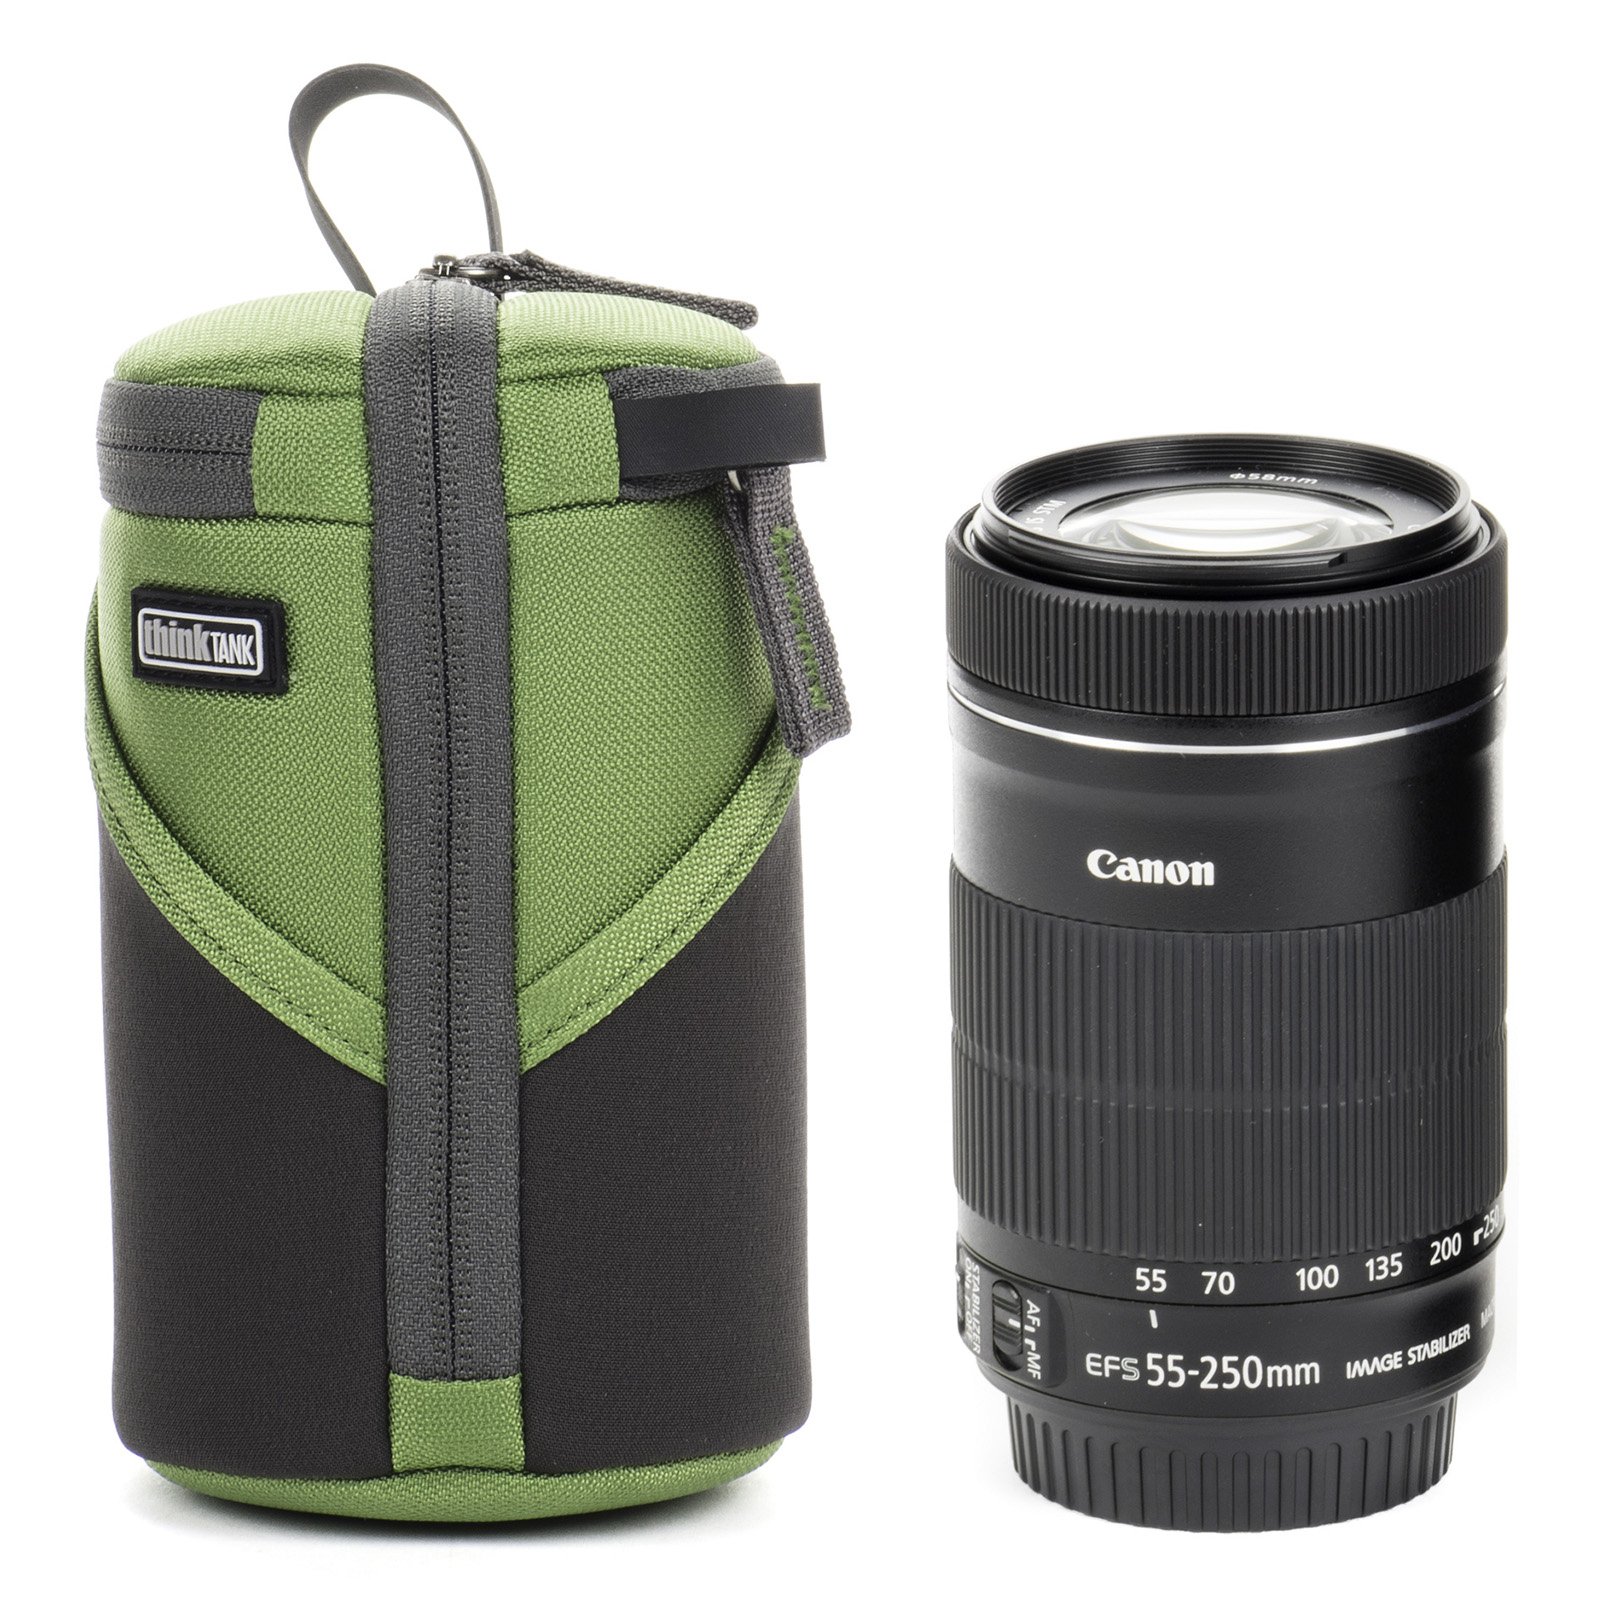 THINK TANK LENS CASE DUO 10 GREEN